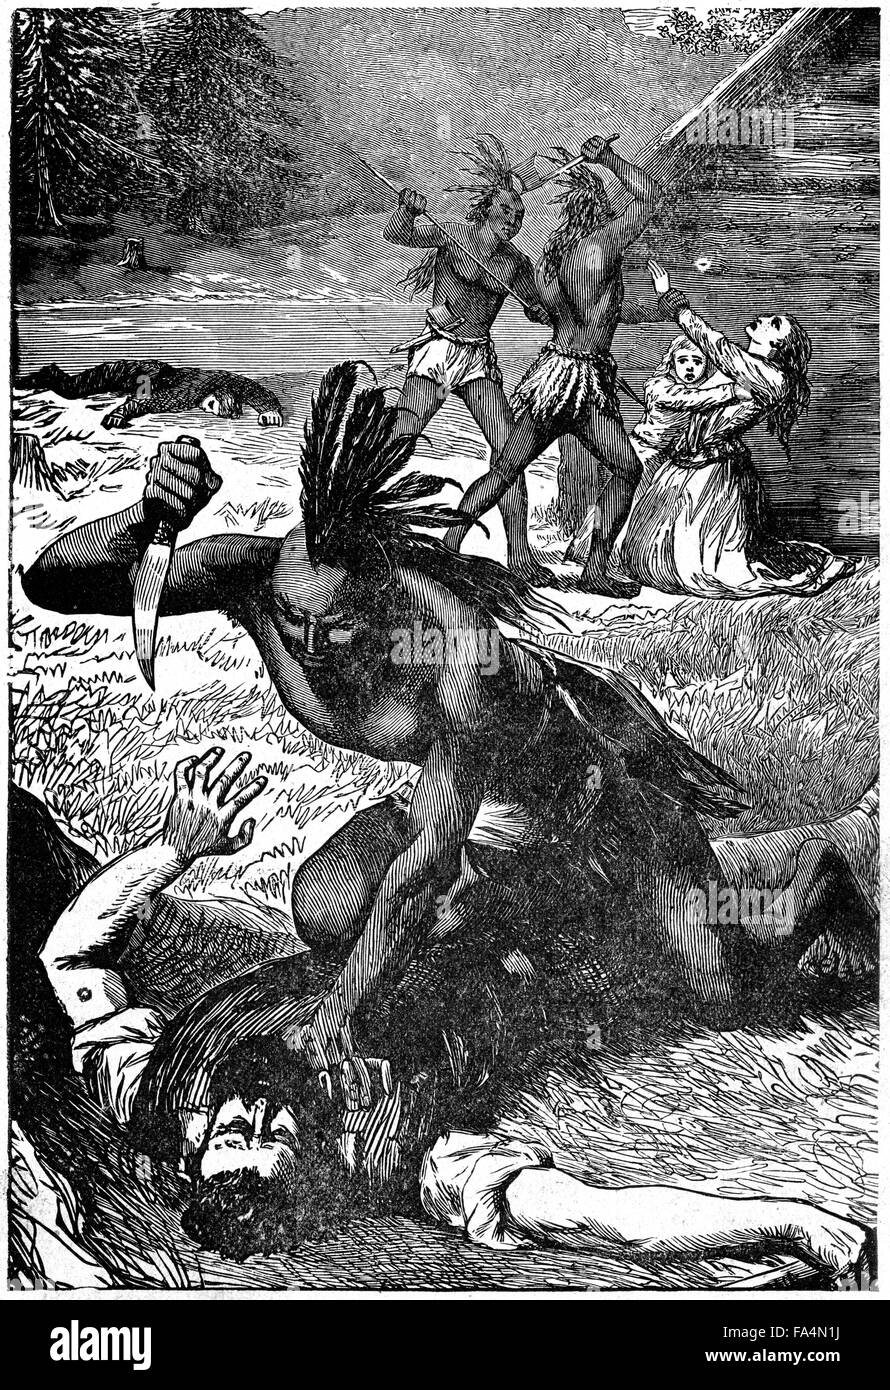 “Massacre of Settlers by the Indians”, tribe and location unspecified, Book Illustration from “Indian Horrors or Massacres of the Red Men”, by Henry Davenport Northrop, 1891 Stock Photo